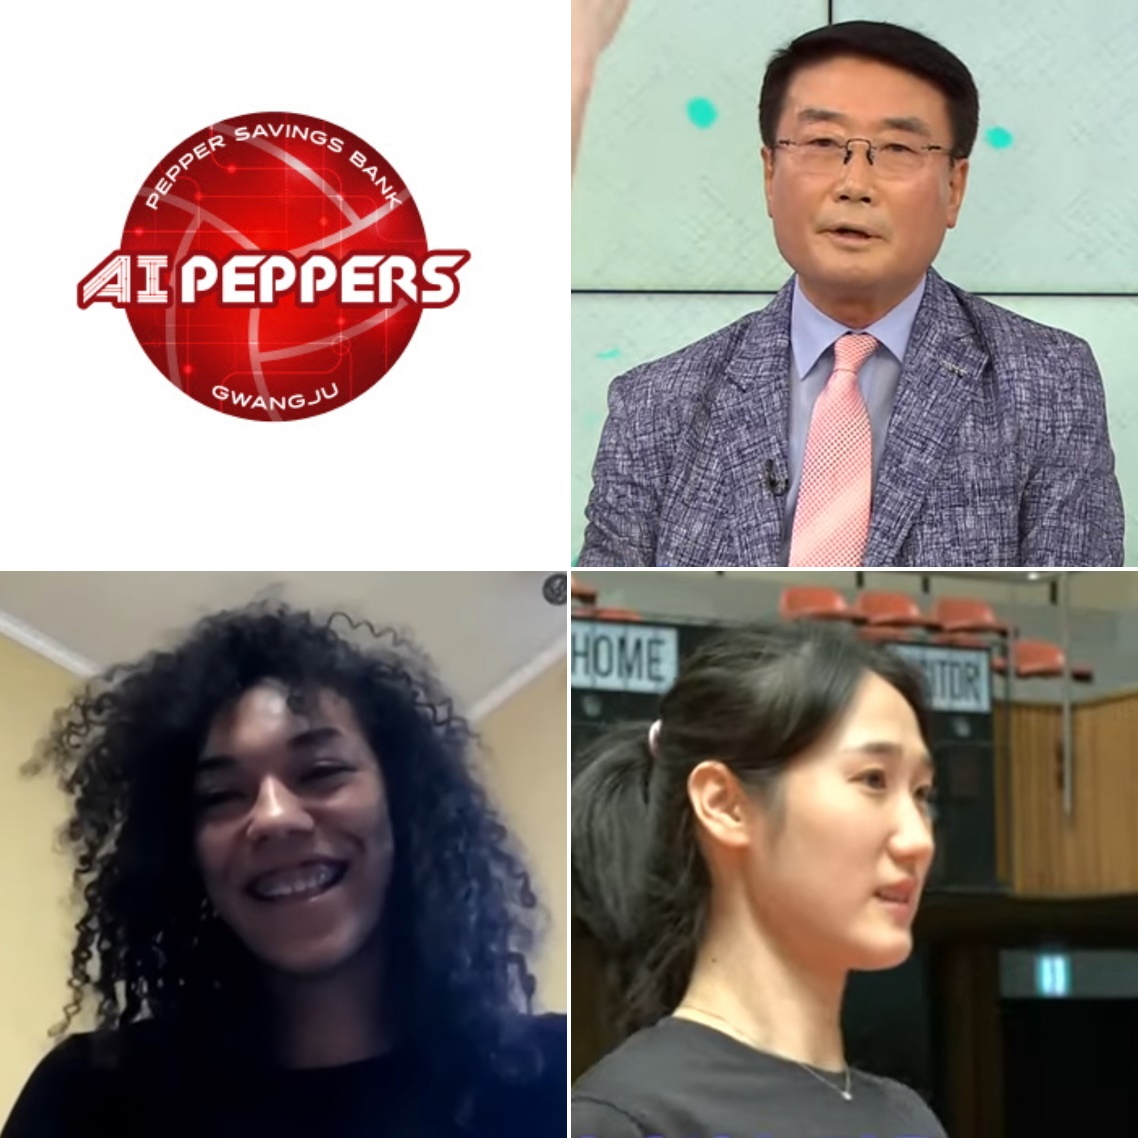 AIPEPPERS